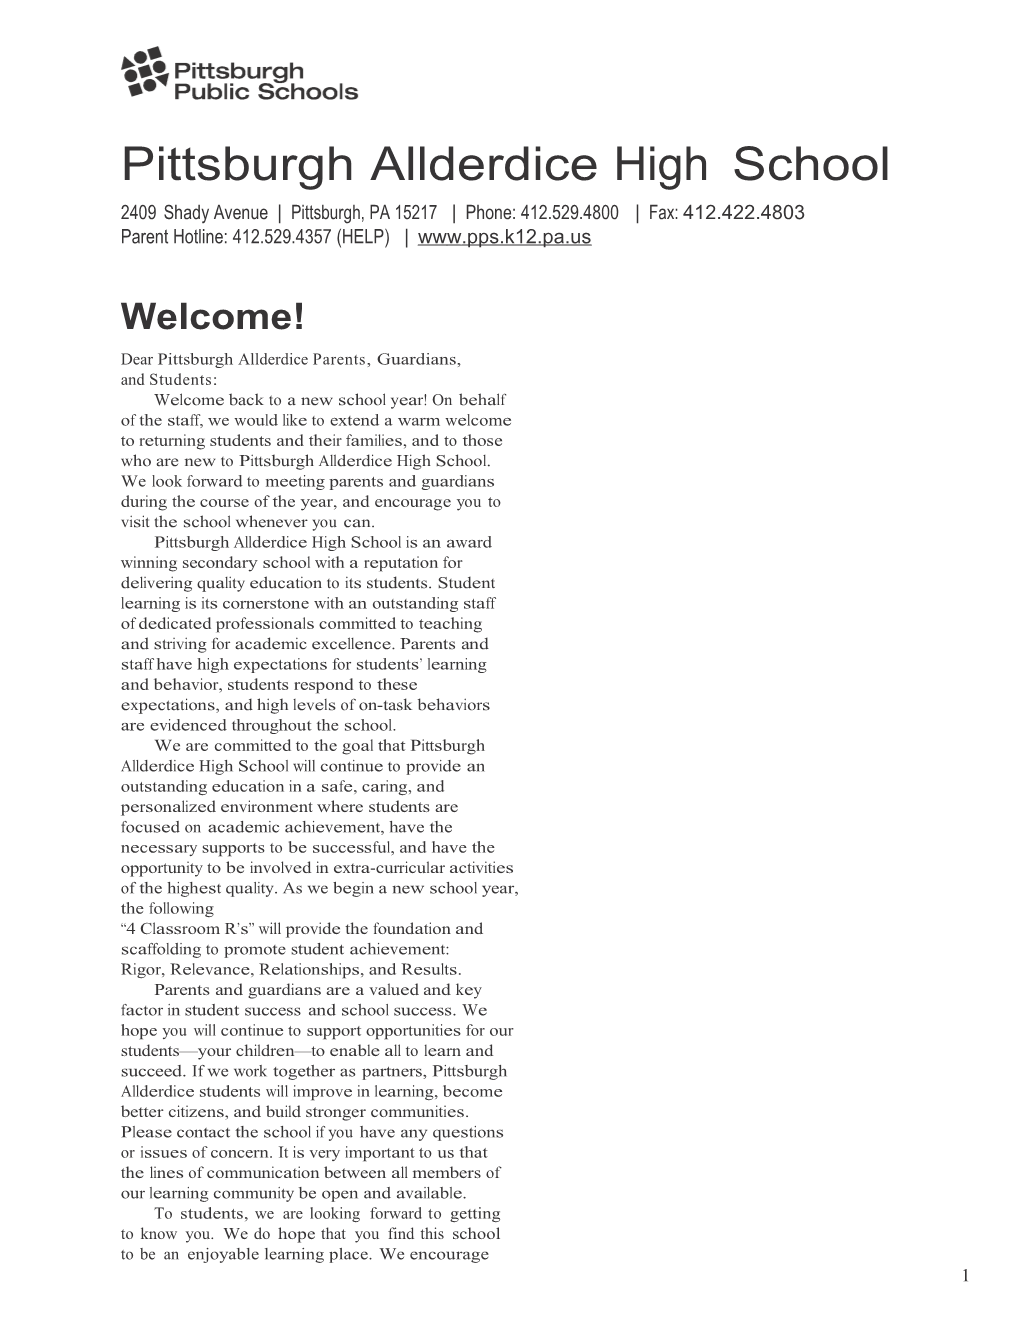 Dear Pittsburghallderdice Parents,Guardians, and Students